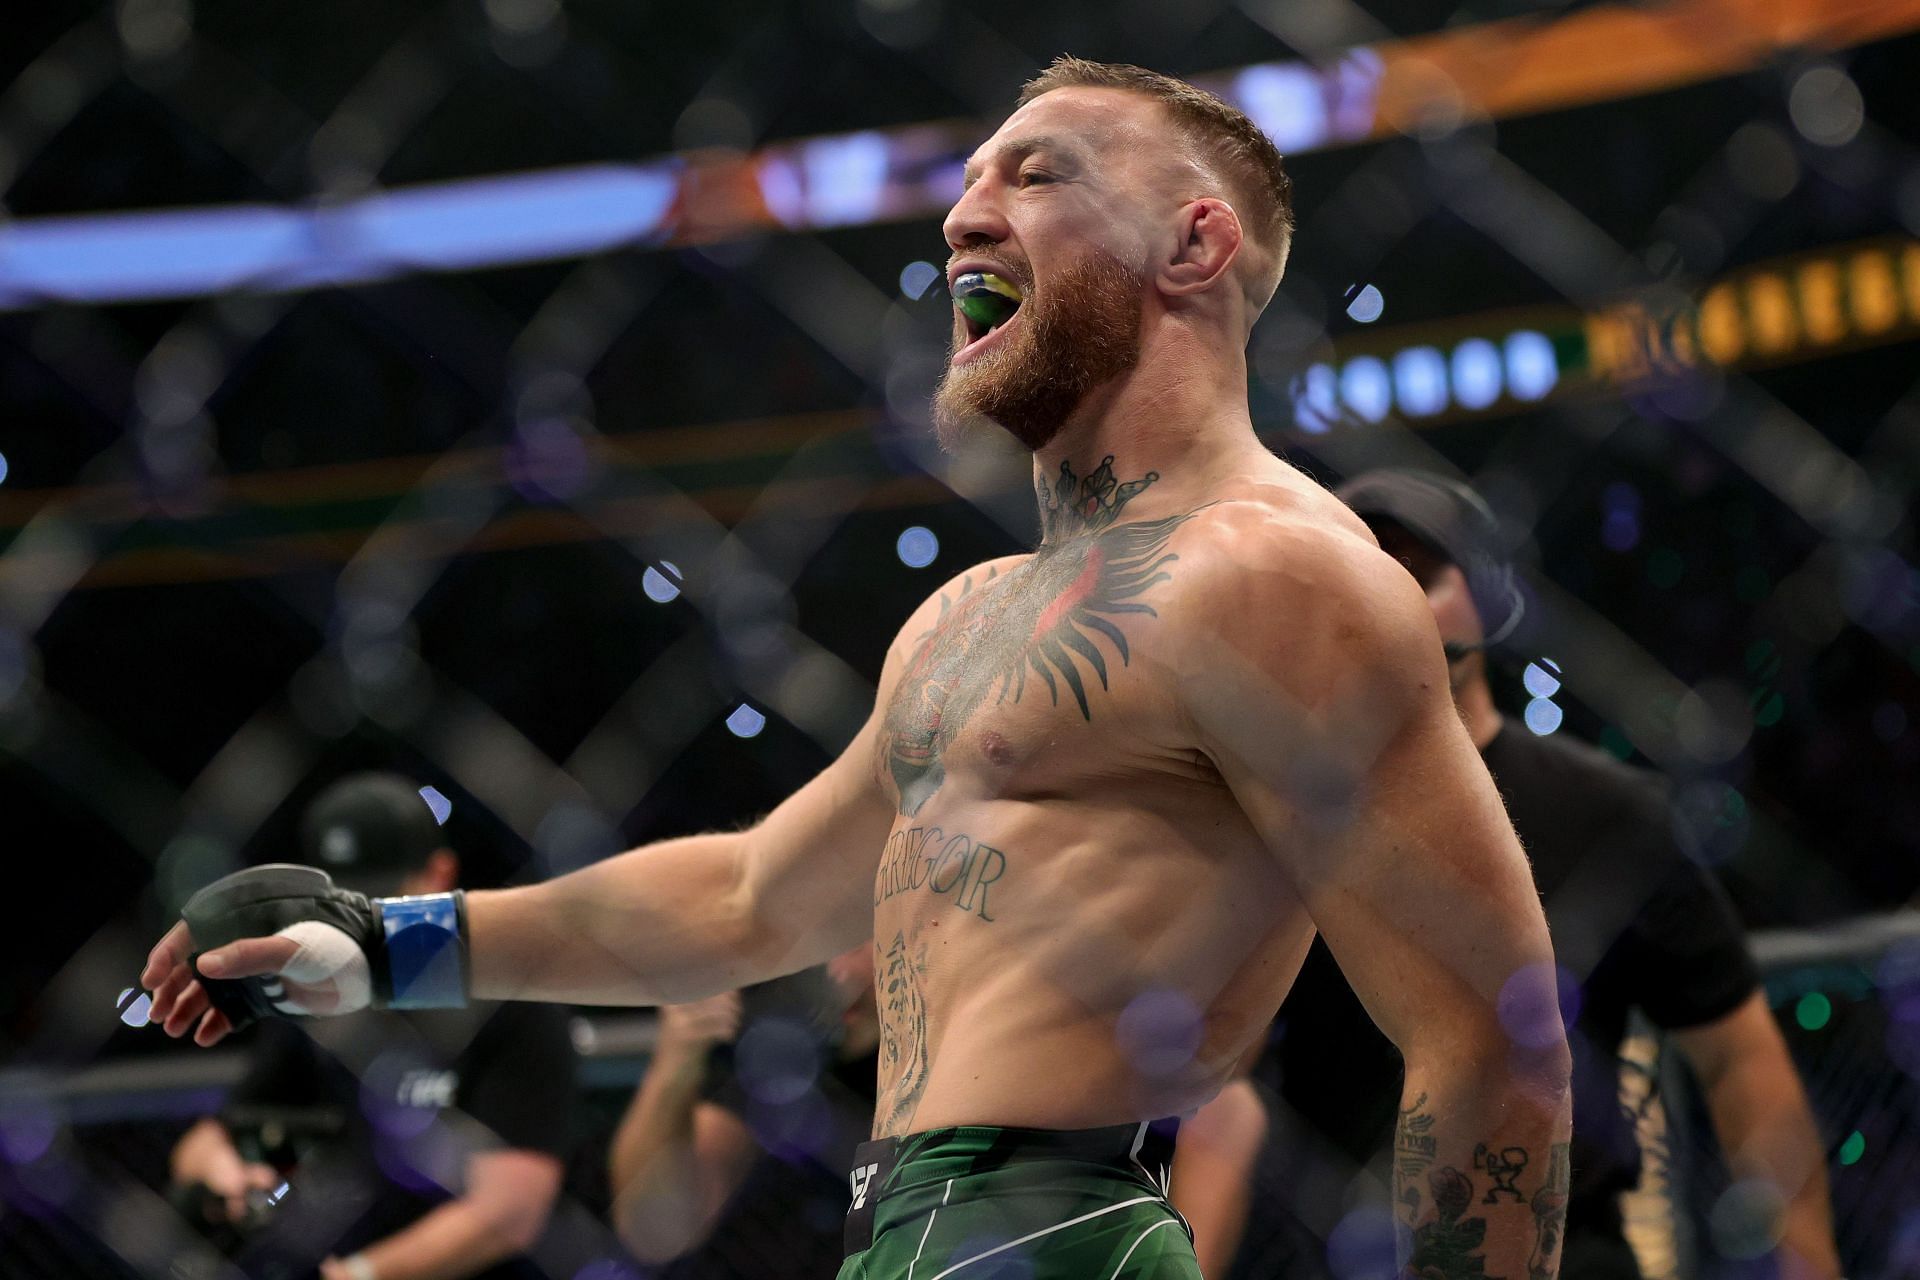 Could the No. 9 ranked McGregor win lightweight gold in 2022?